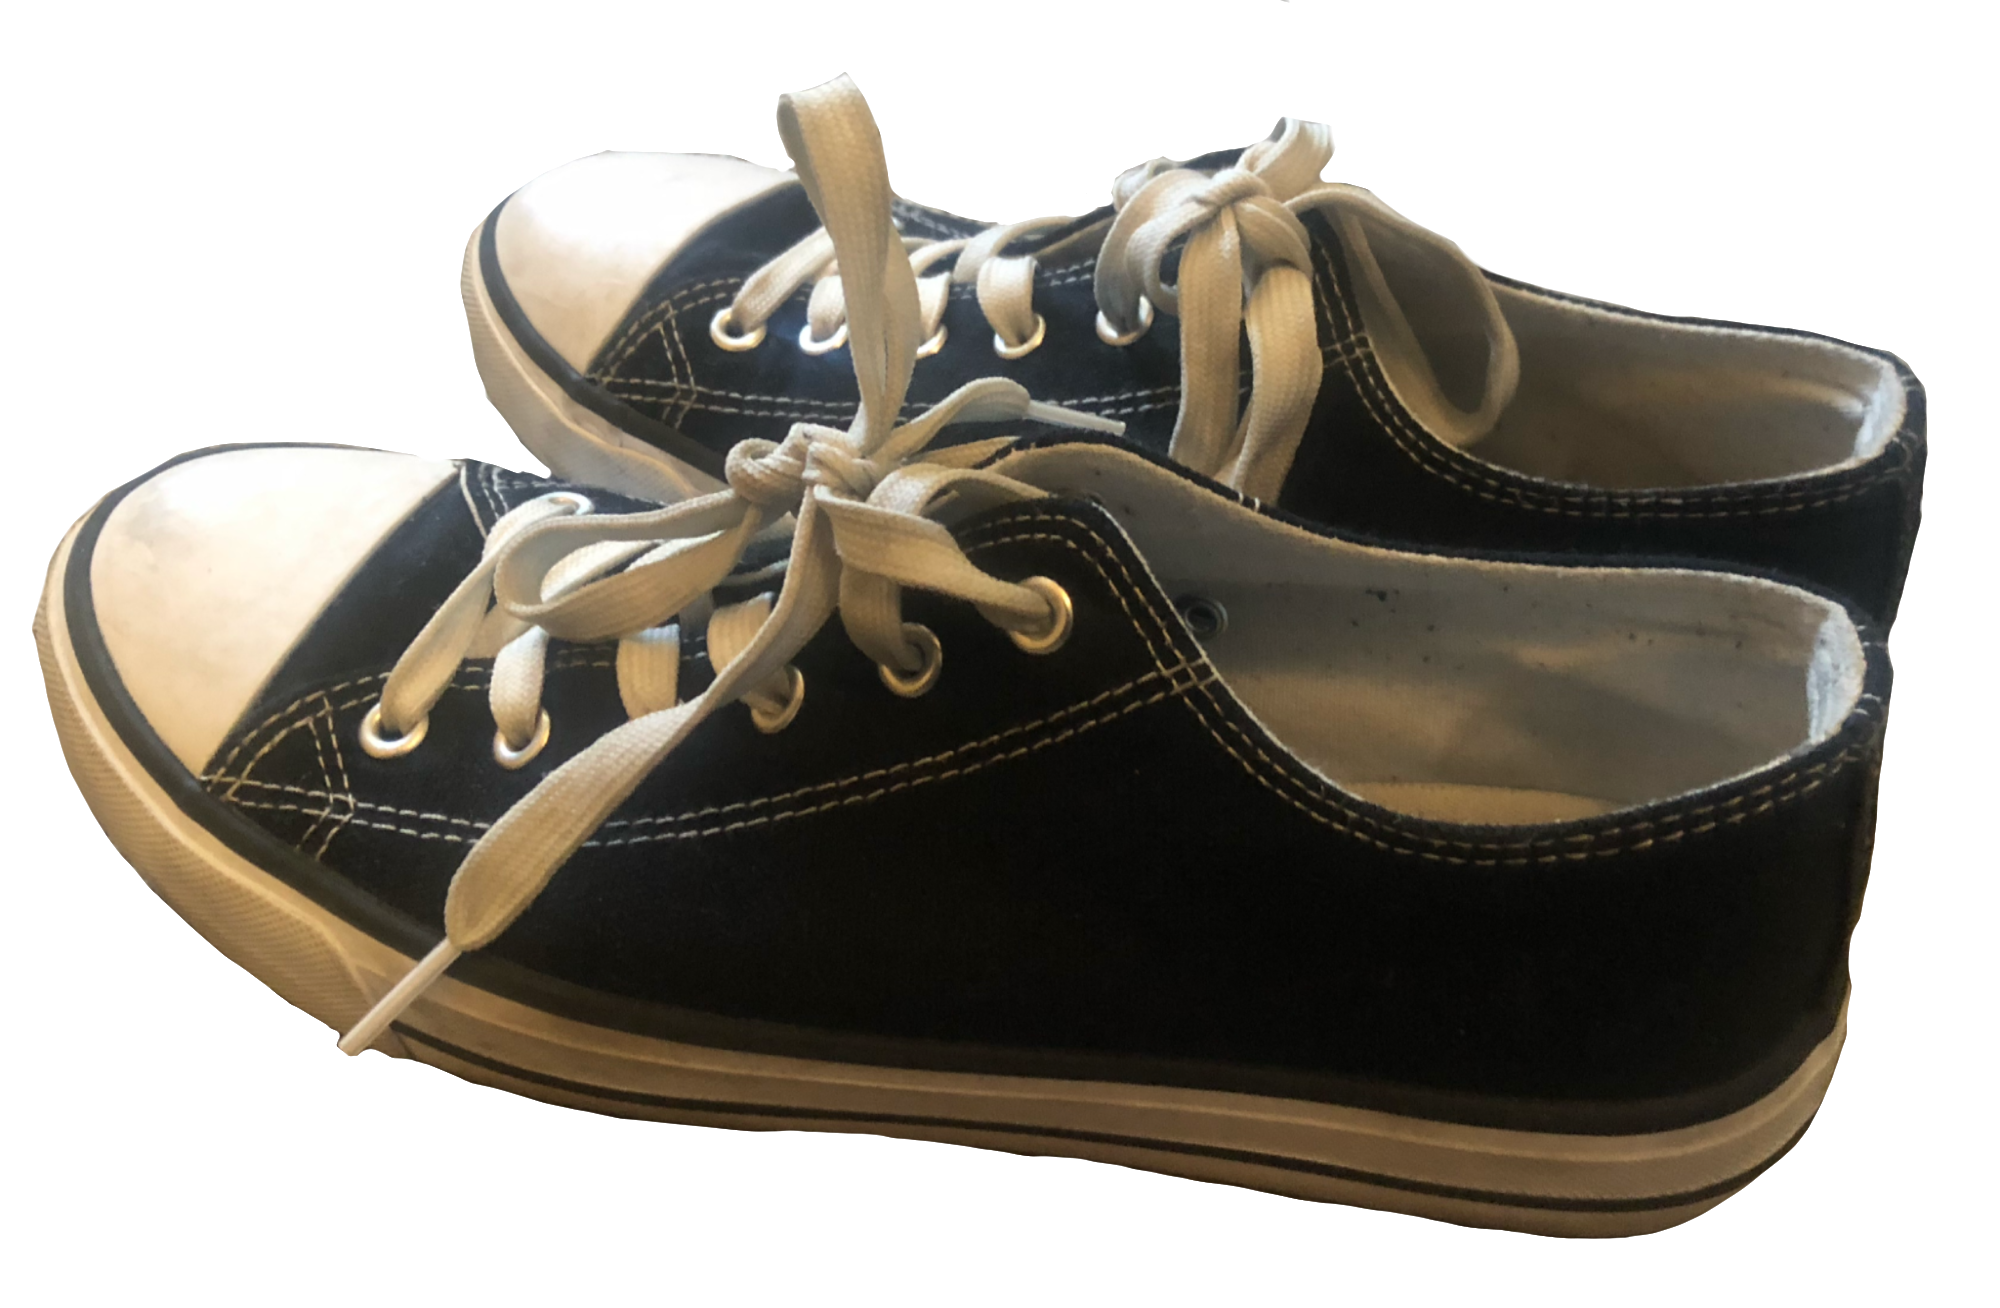 A pair of black canvas shoes, that go up to the ankle.